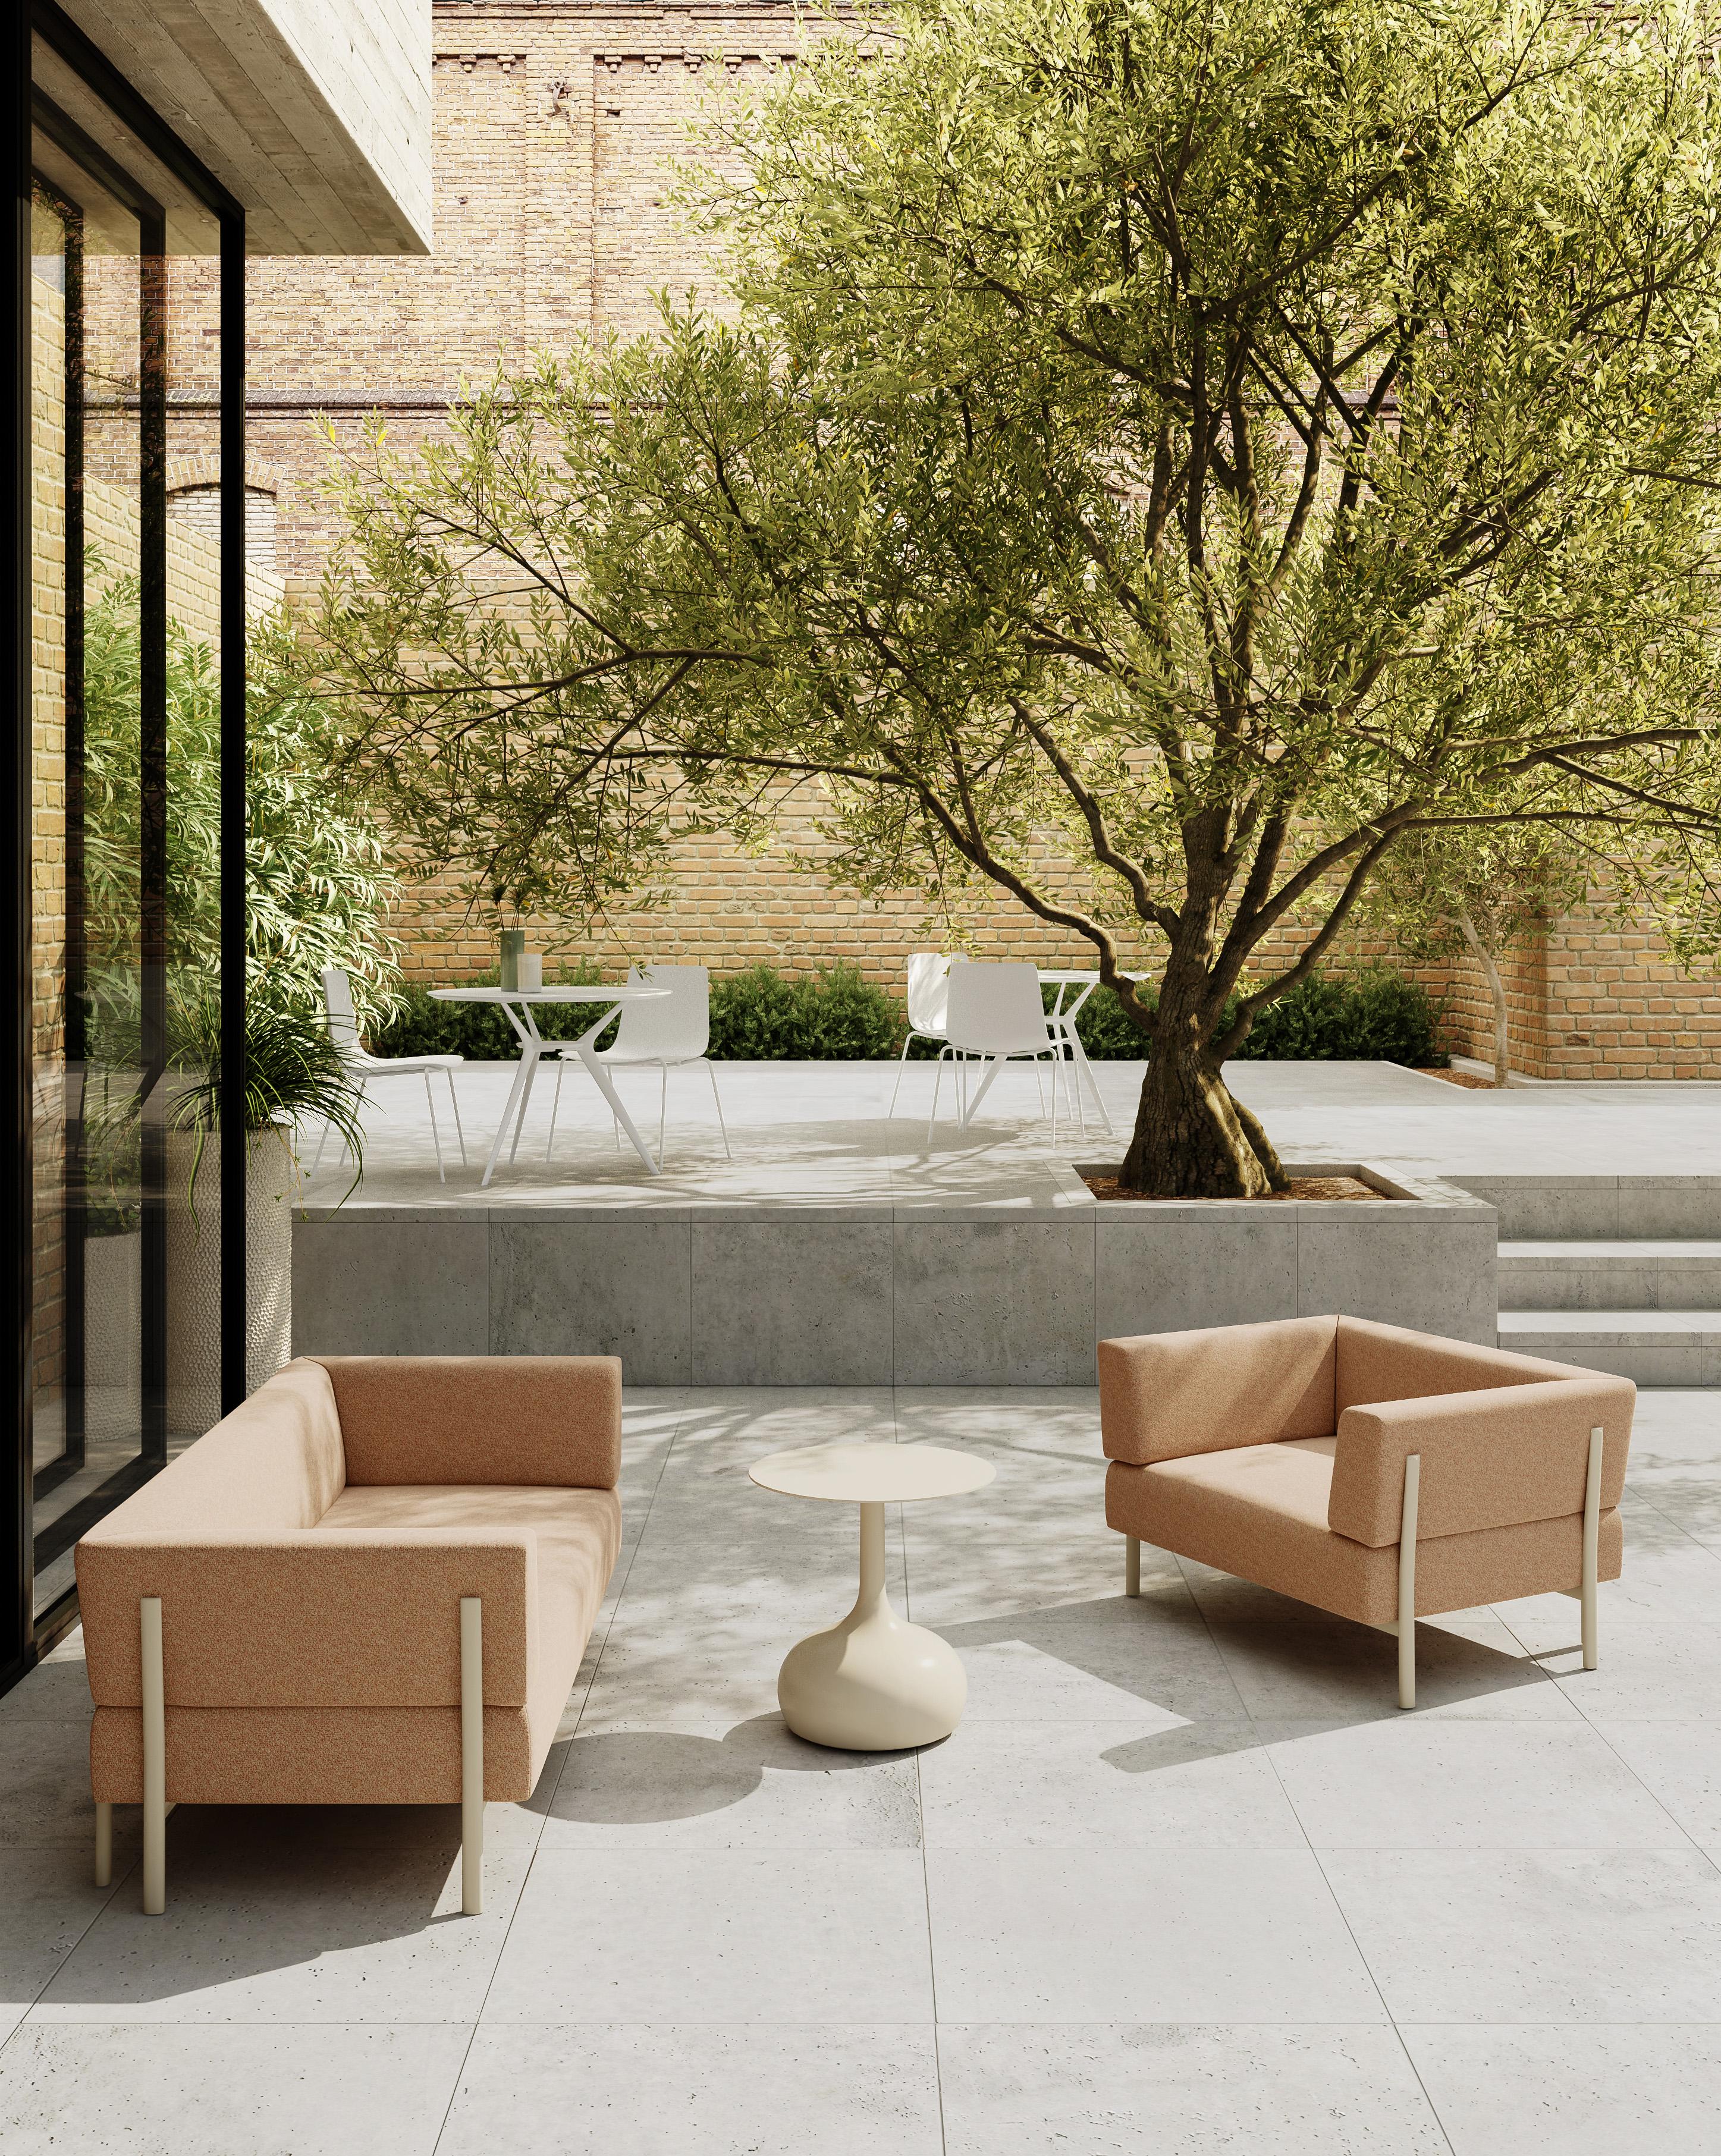 Alias T03_O Ten 3 Seater Outdoor Sofa in Dark Grey and White Lacquered Aluminum Frame by PearsonLloyd

Three-seater sofa for outdoor use with lacquered die-cast aluminium legs and stainless steel frame.Seat, back and armrests with removable cover